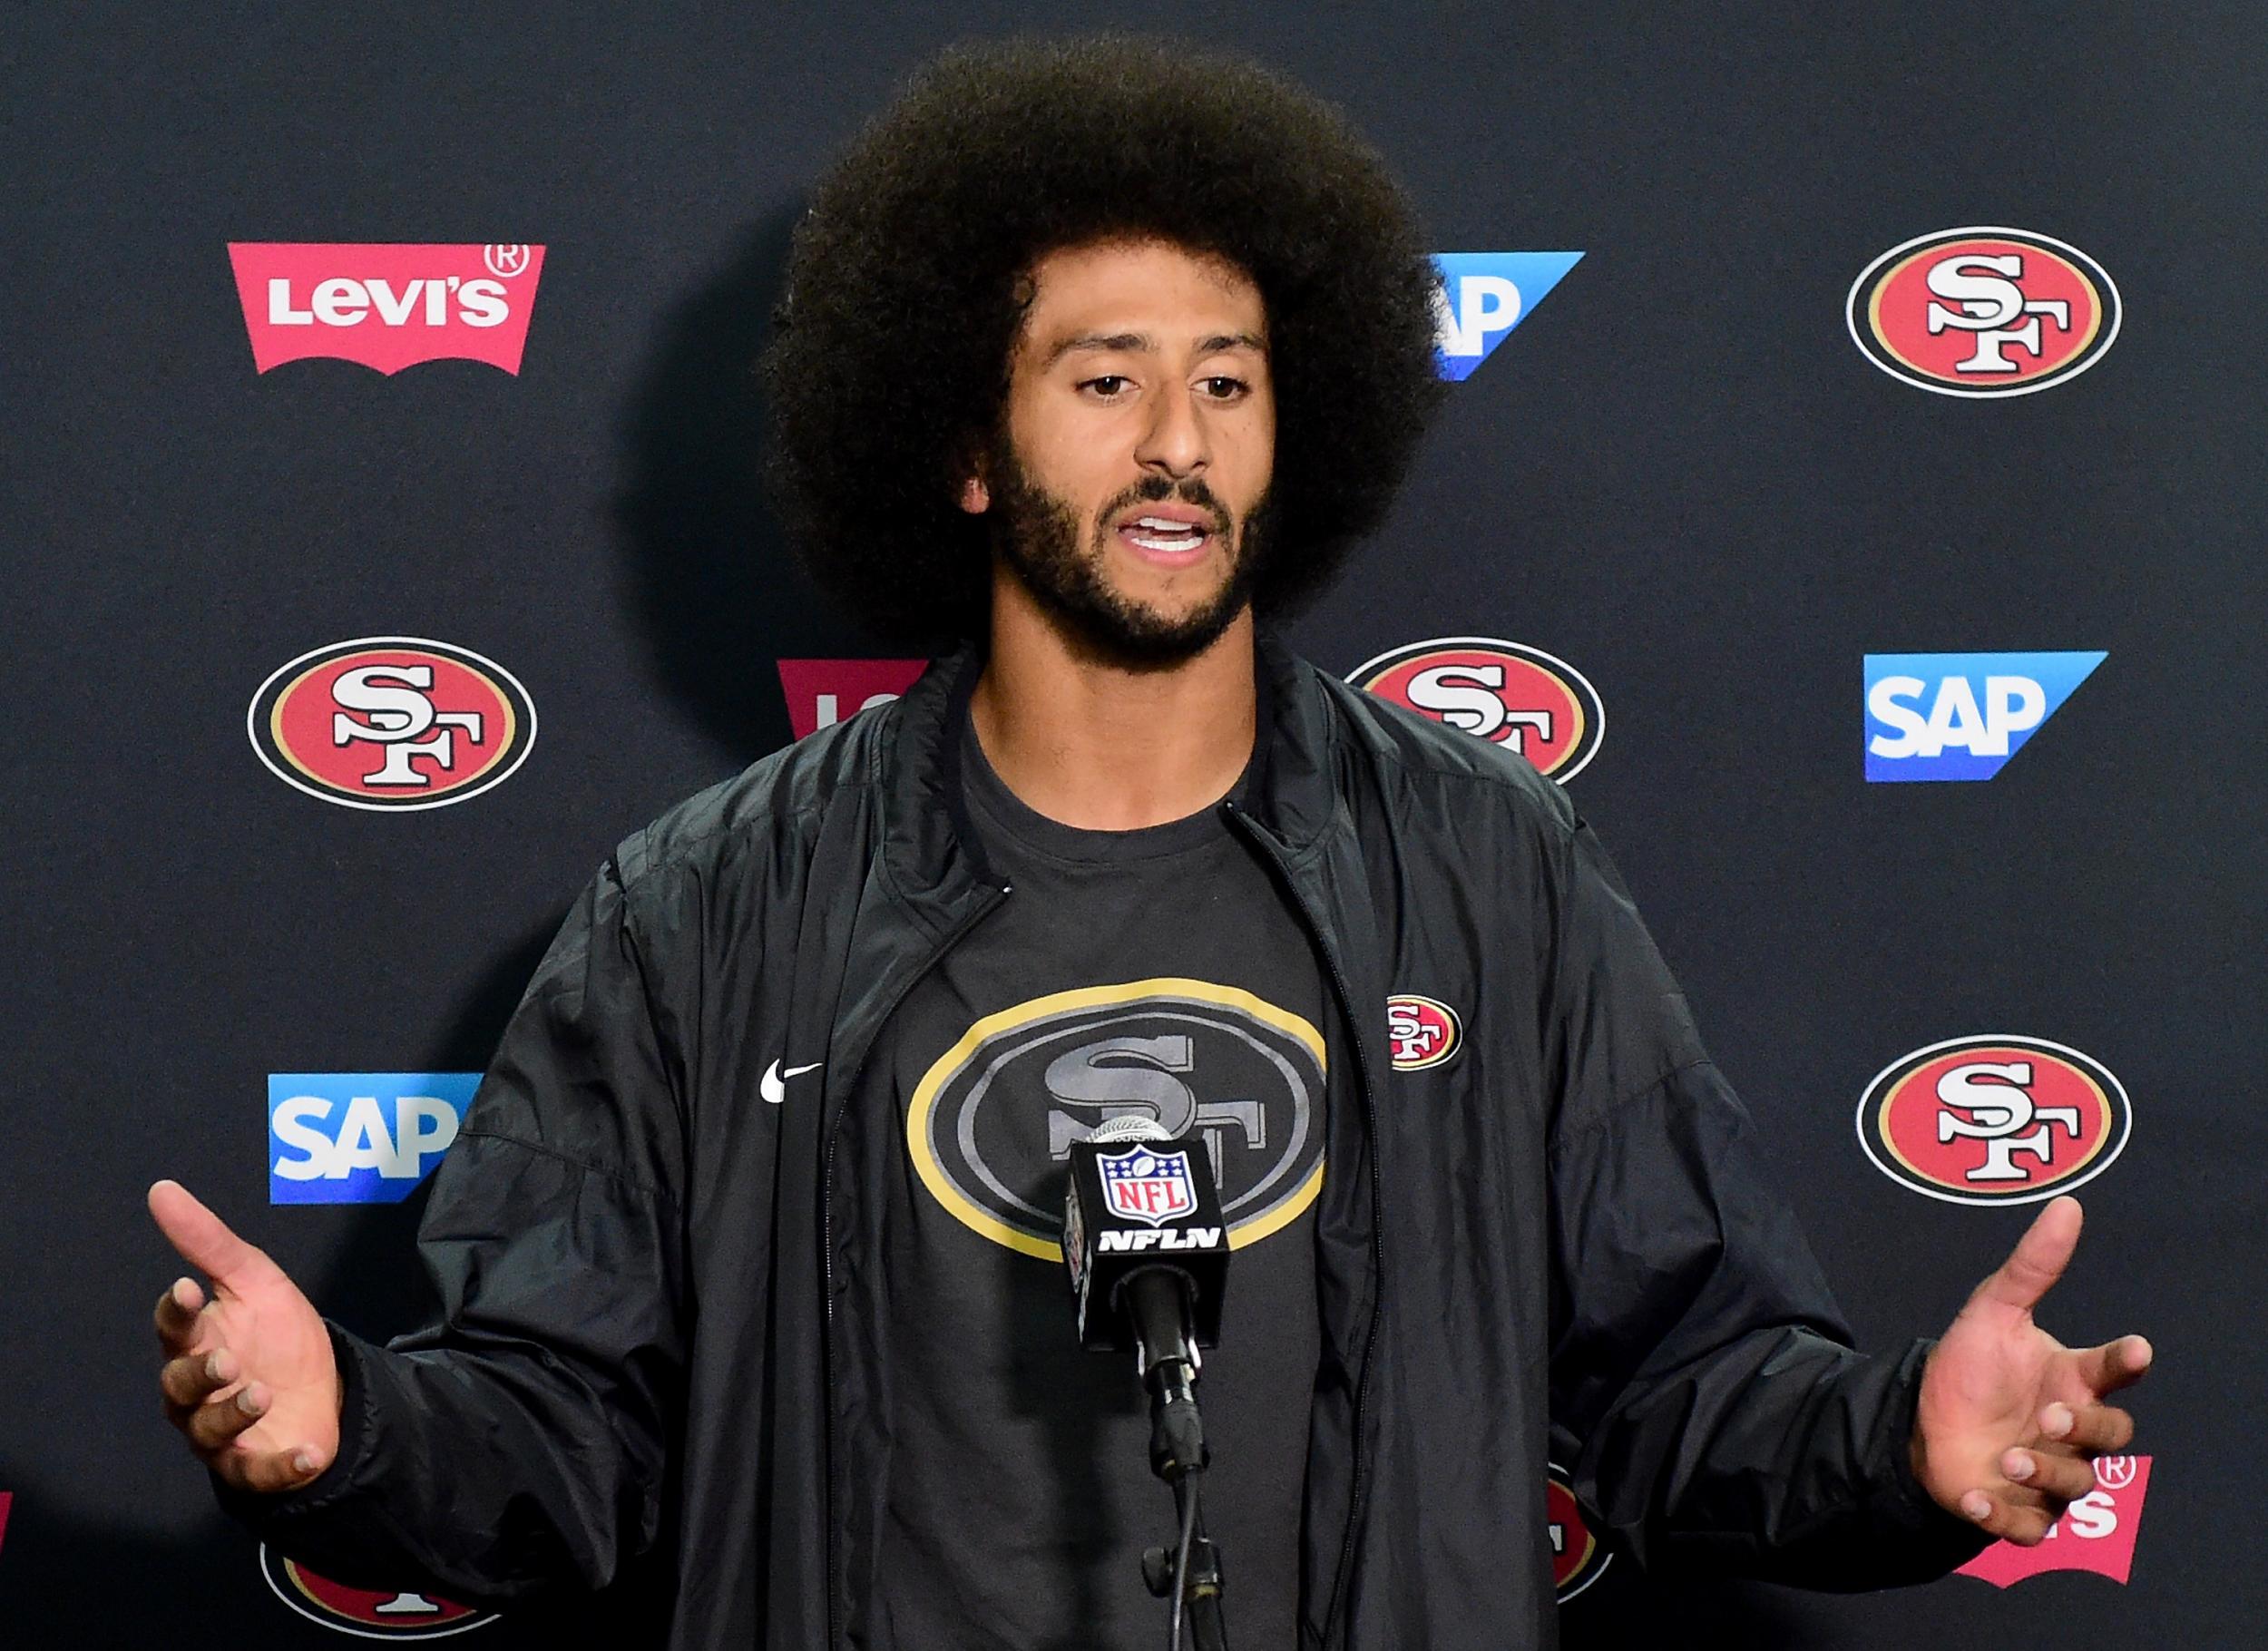 Kaepernick has started a movement which includes other teams and footballer Megan Rapinoe